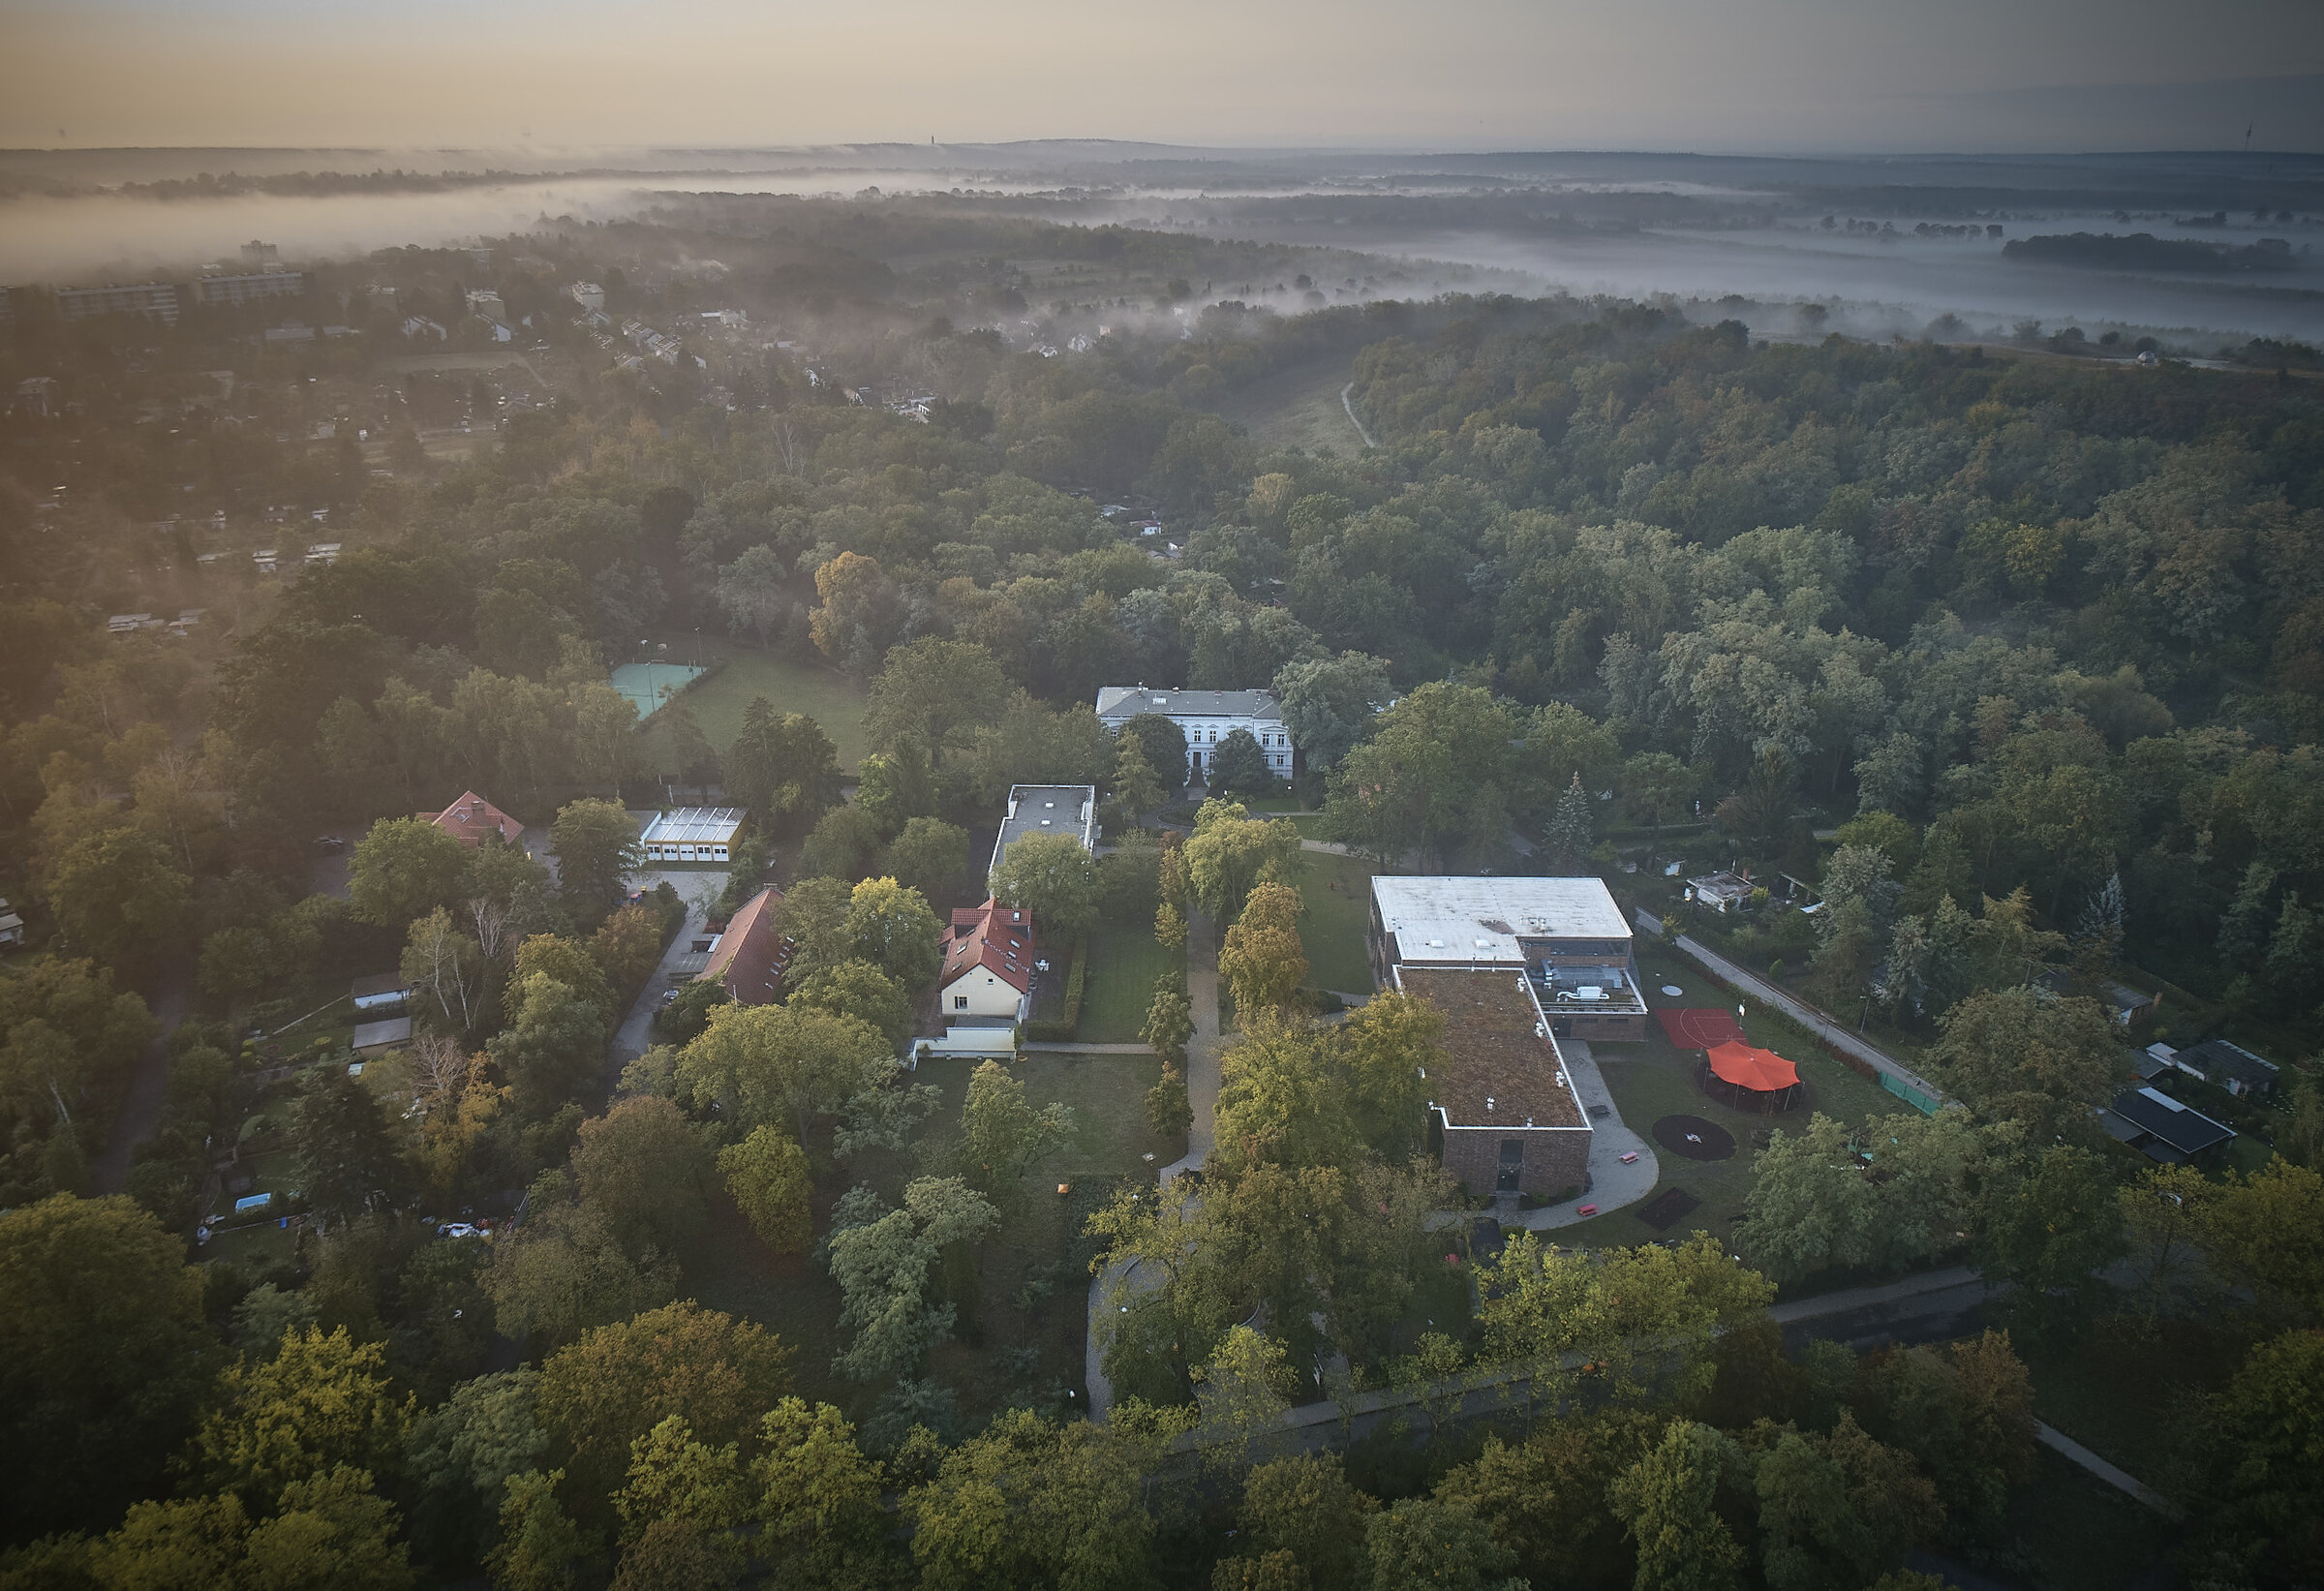 Aerial view of the school grounds at dawn